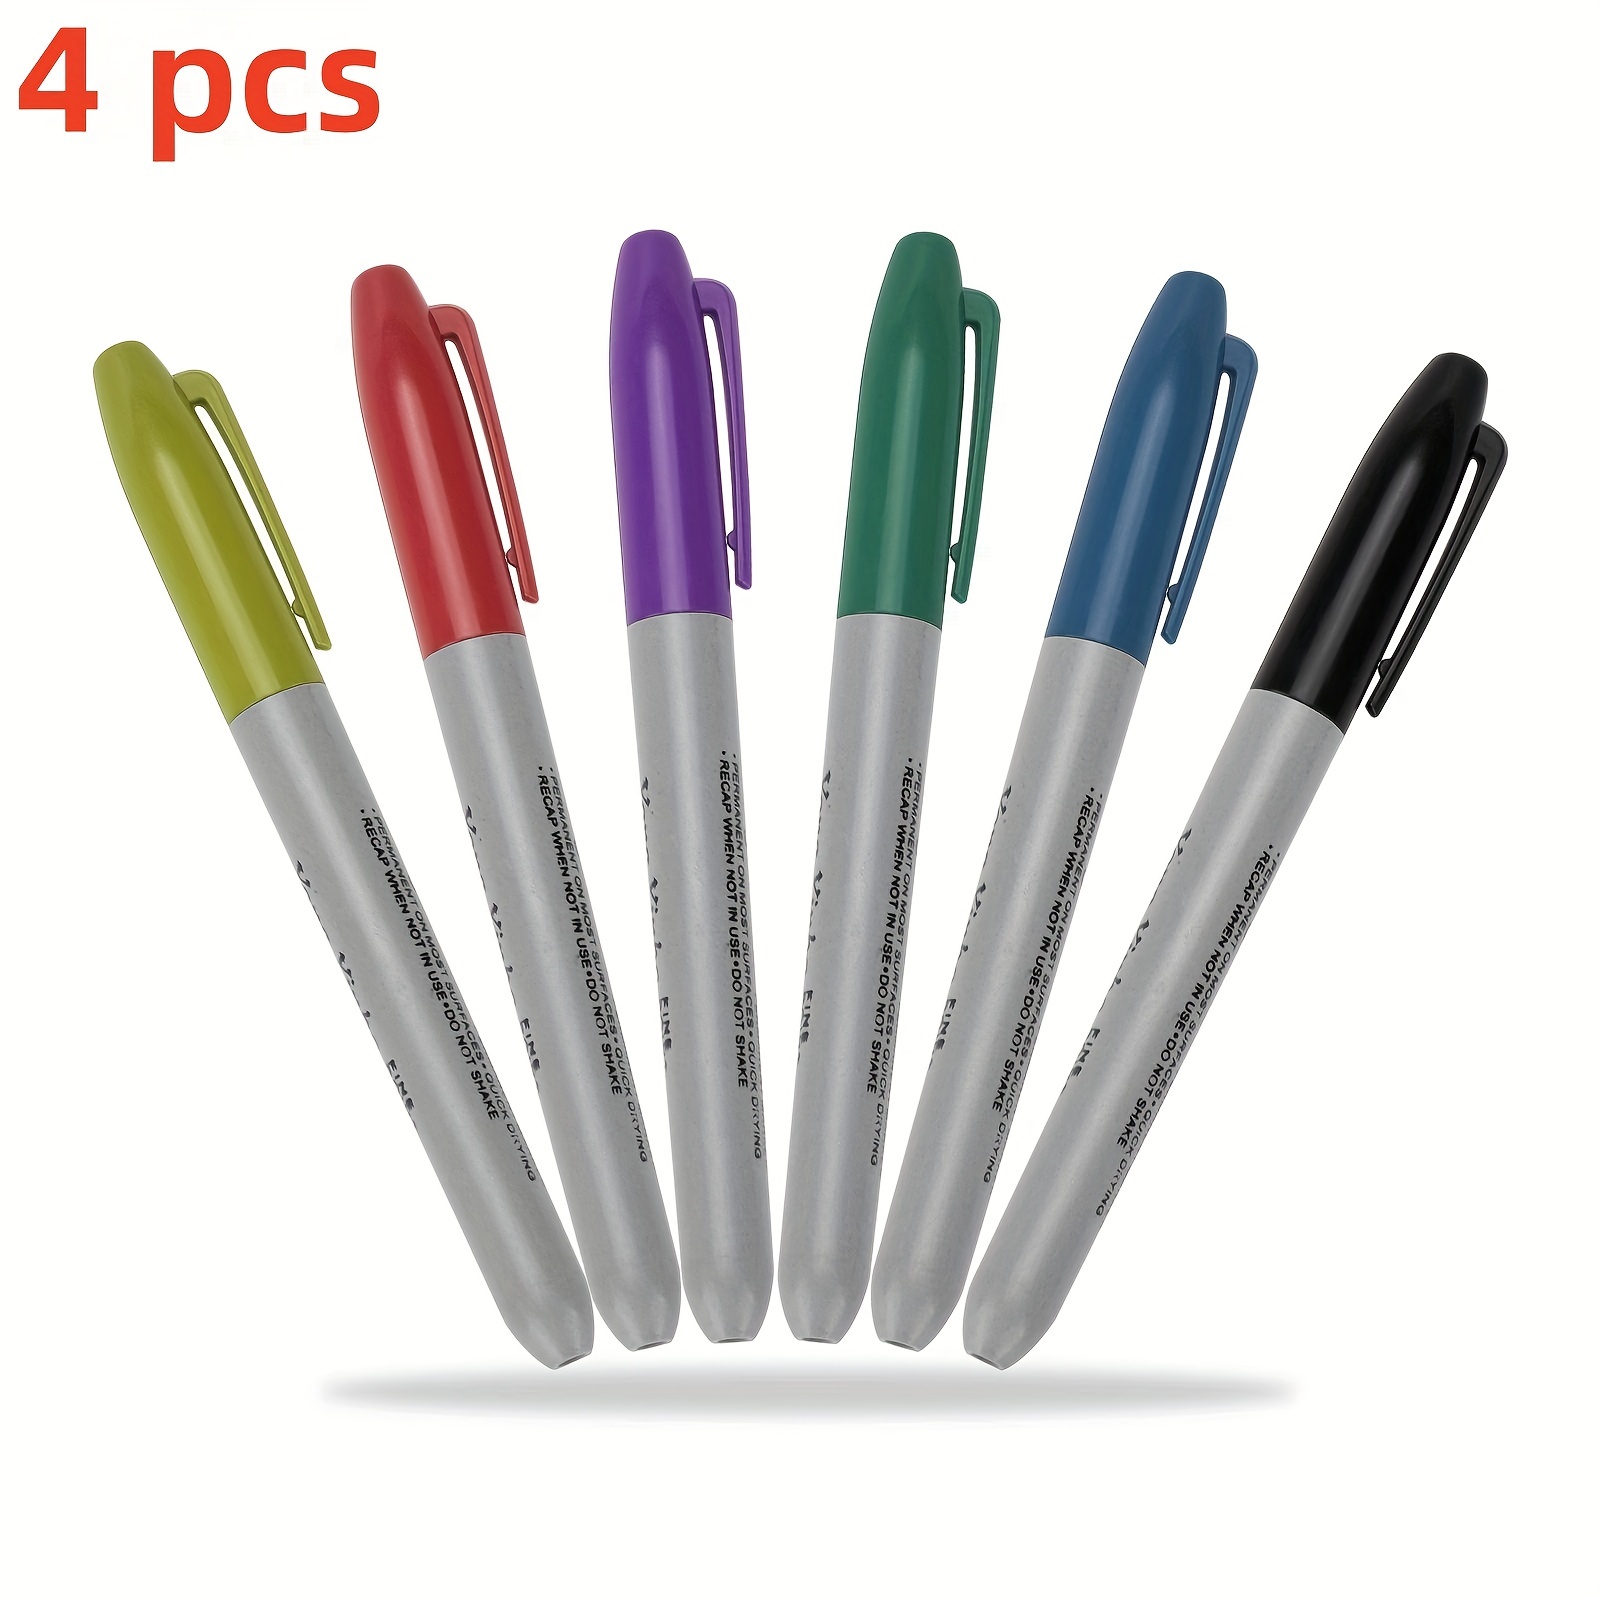 ZEYAR Acrylic White Marker Pens - 5 Sizes, Quick-Drying, Waterproof, Fade  Resistant, Non-Toxic